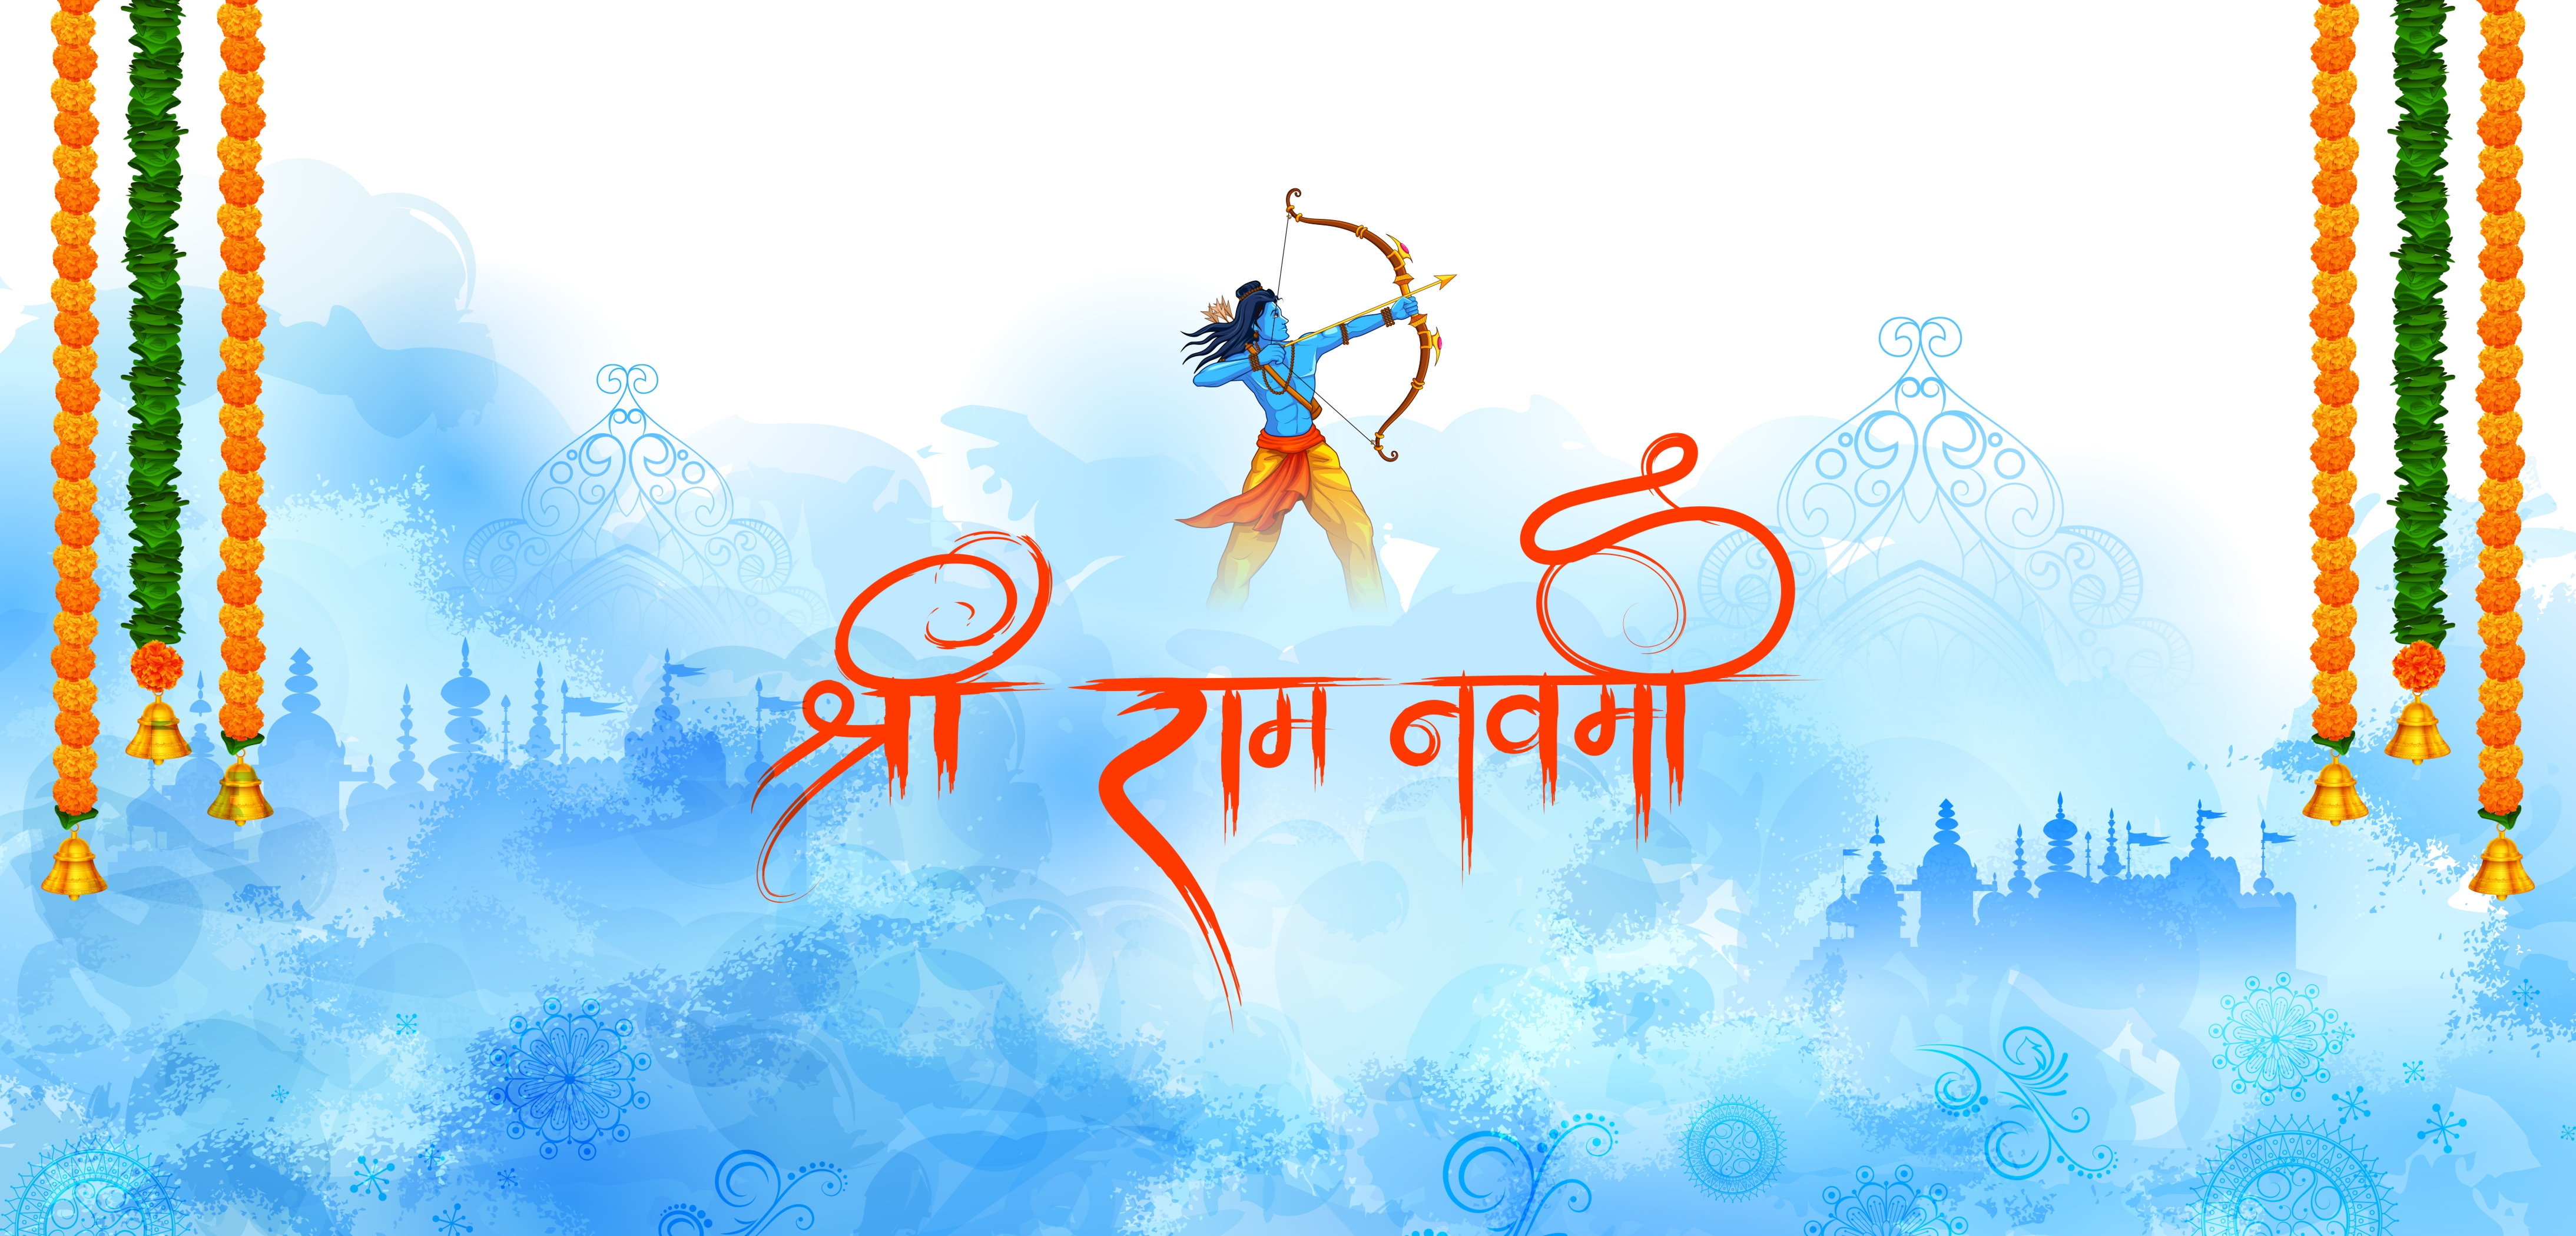 Happy Ram Navami 2022: Wishes, Images, Status, Quotes, Messages and WhatsApp Greetings to Share in English and Hindi